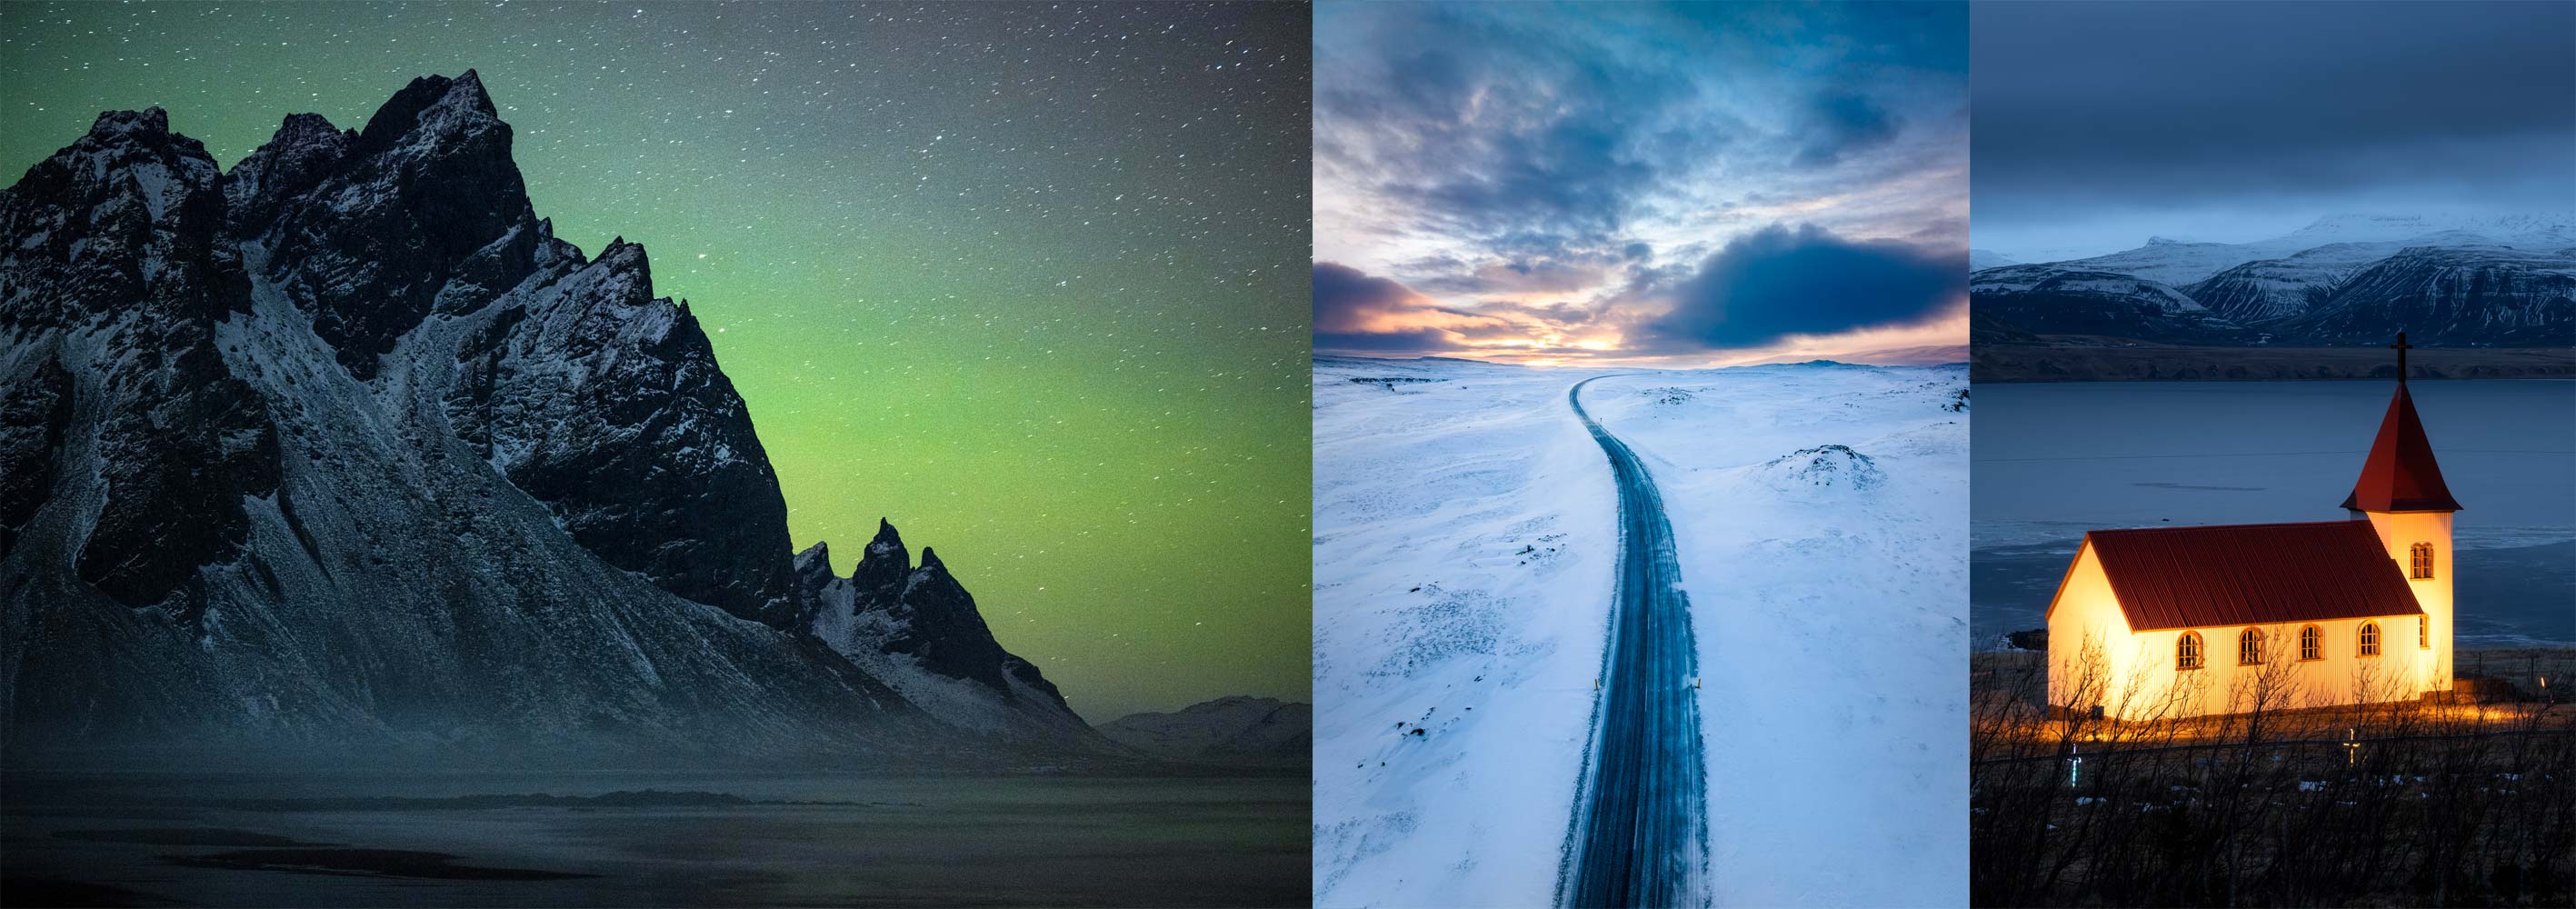 Northern Lights and frozen landscapes shot by Rachid Dahnoun in Iceland